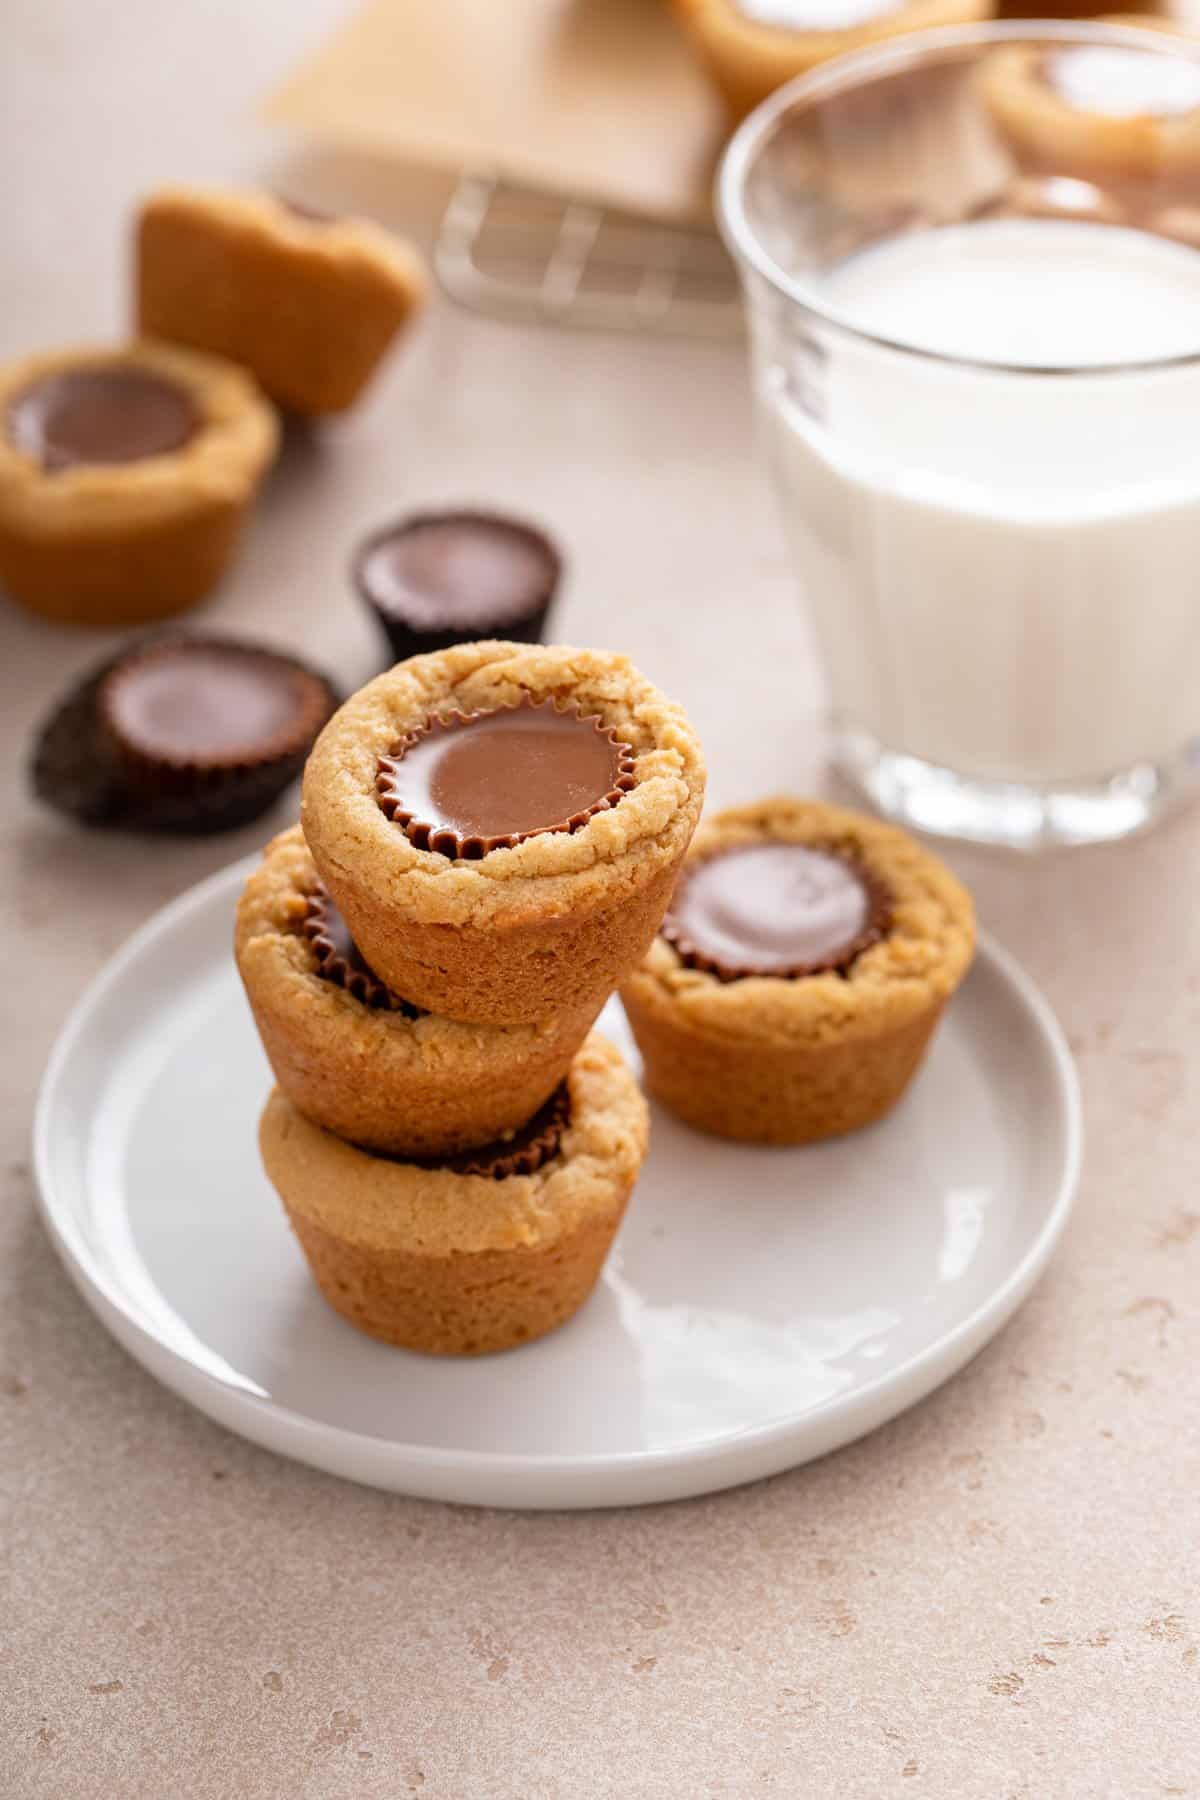 Three peanut butter cup cookies stacked on a white plate in front of a glass of milk.